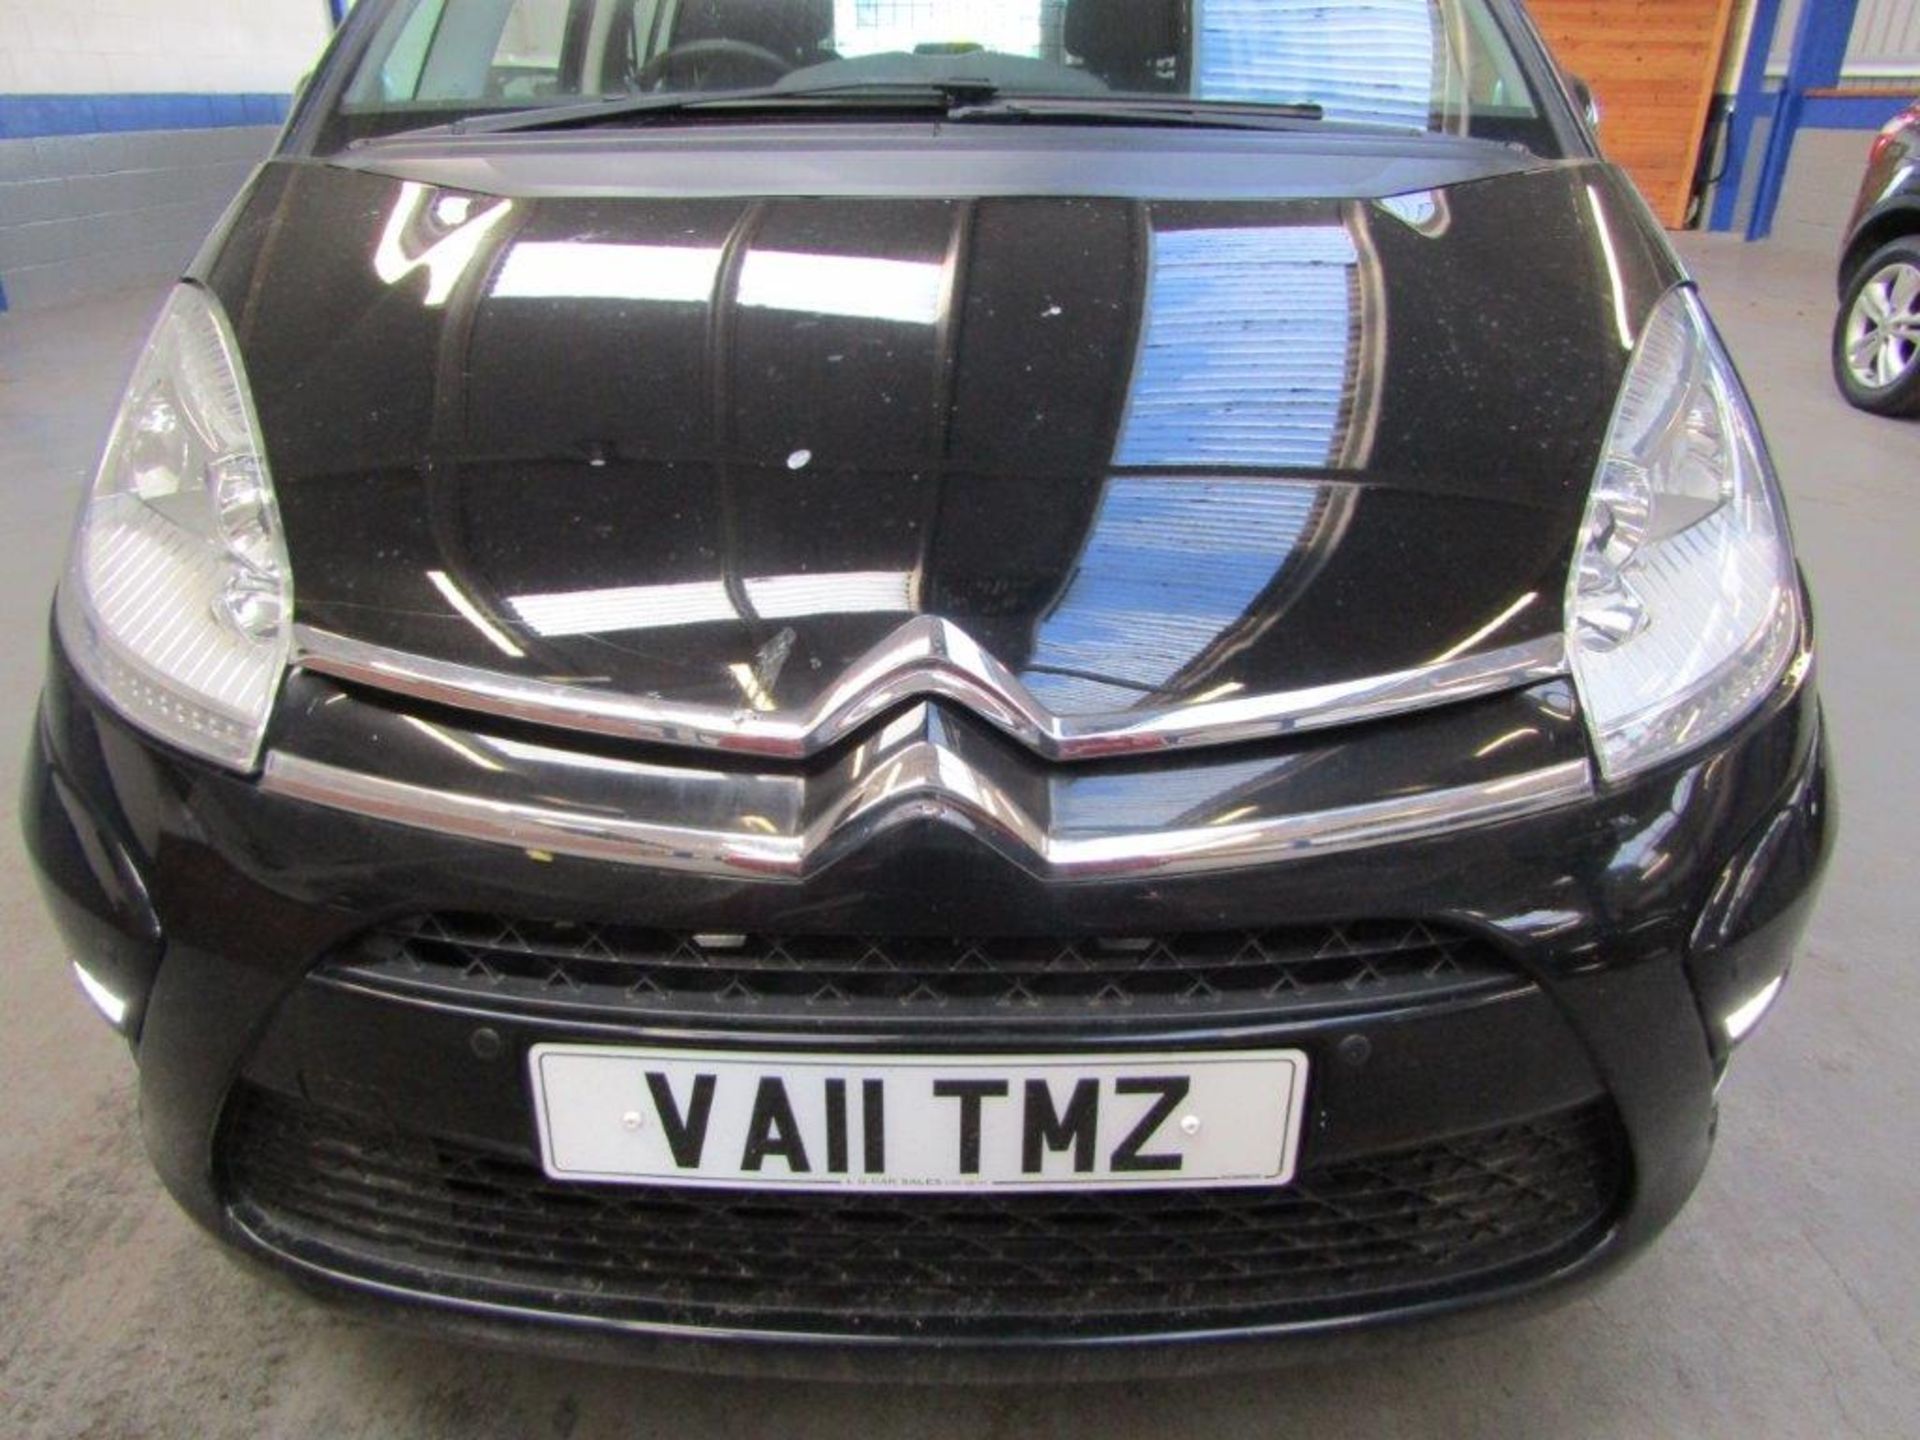 11 11 Citroen C4 G Picasso VTR+HDI - Image 9 of 21